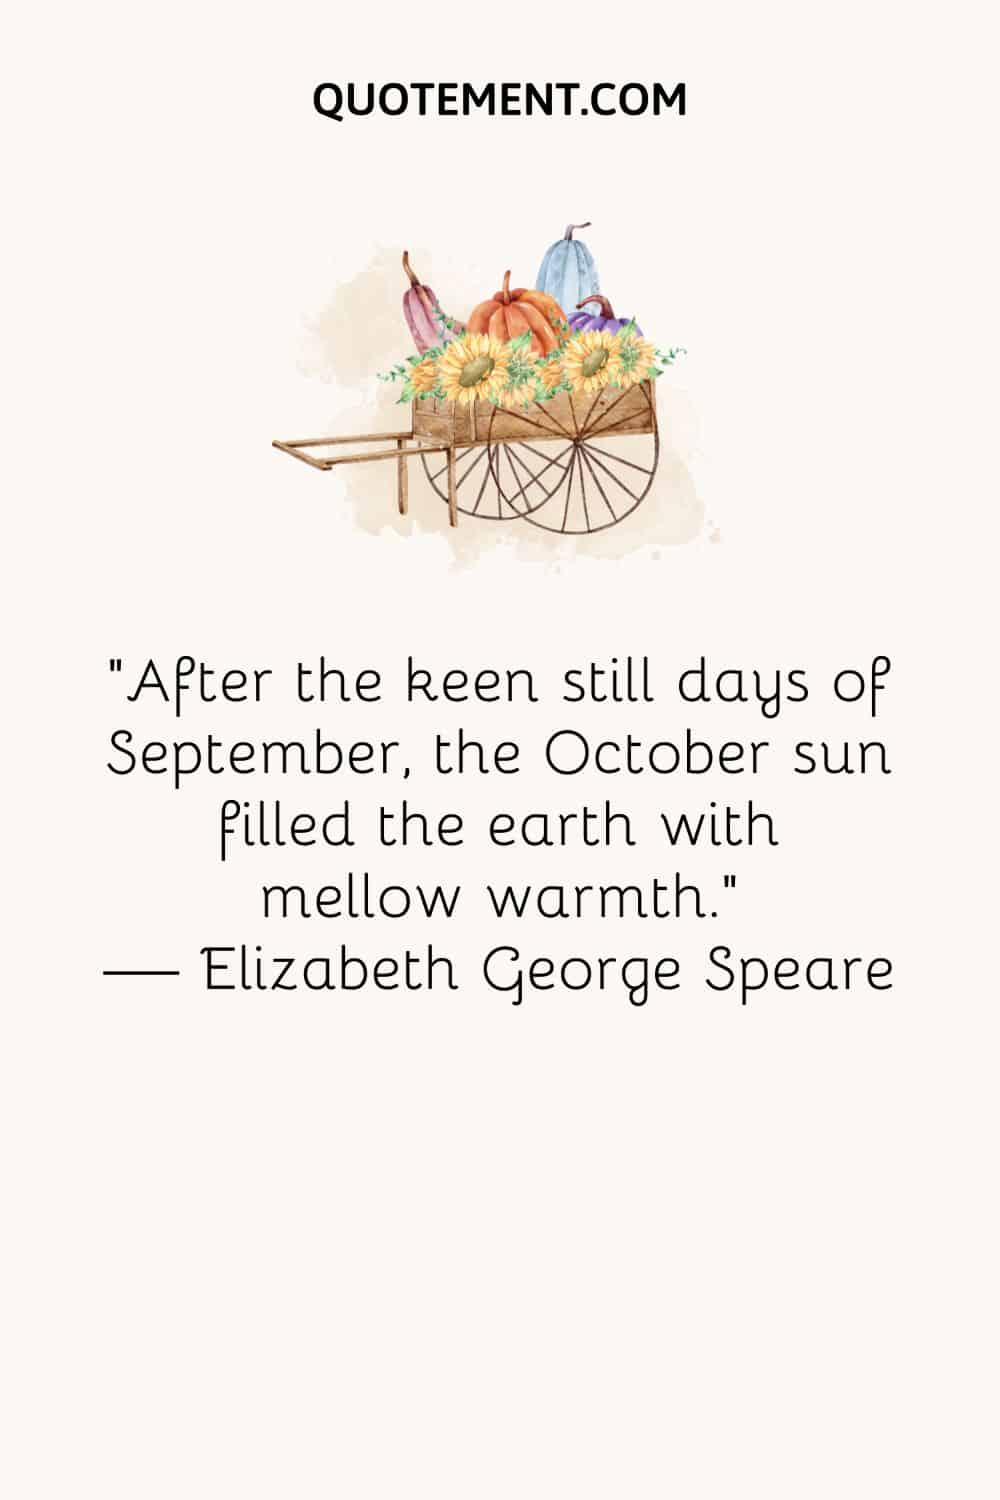 After the keen still days of September, the October sun filled the earth with mellow warmth.